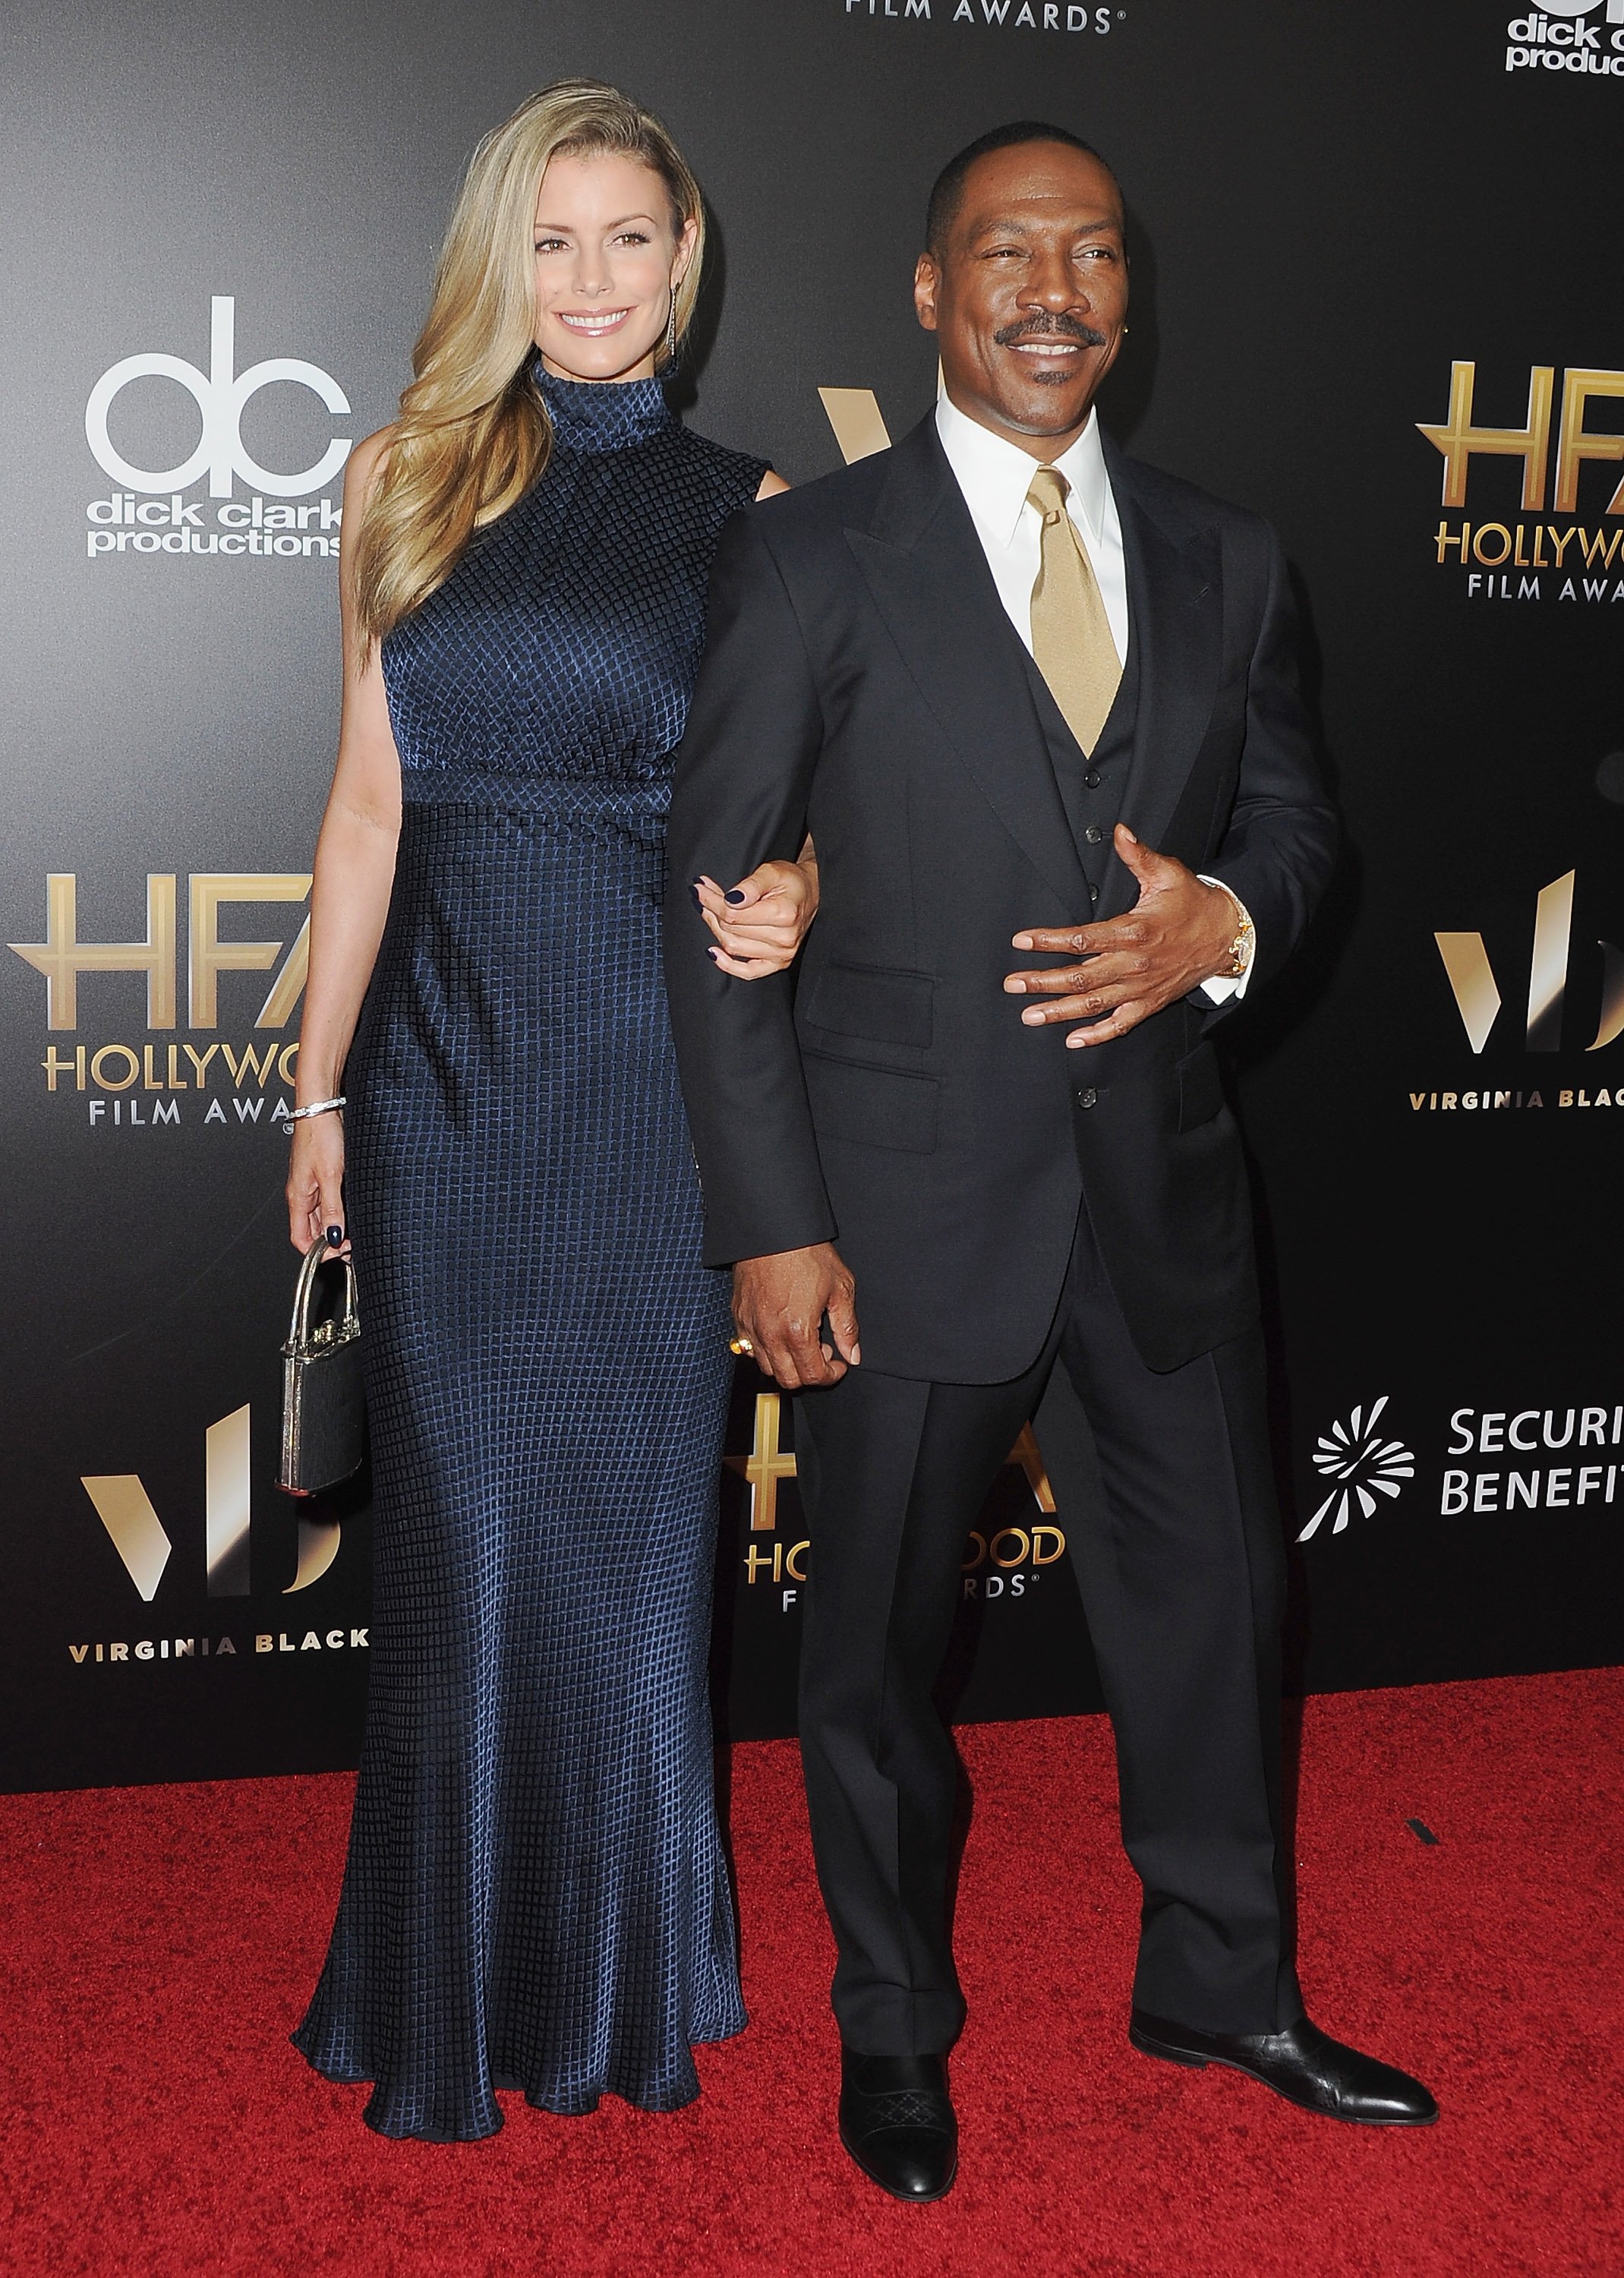  Paige Butcher and Eddie Murphy arrive at the 20th Annual Hollywood Film Awards at the Beverly Hilton Hotel on November 6, 2016 in Los Angeles, California | Source: Getty Images